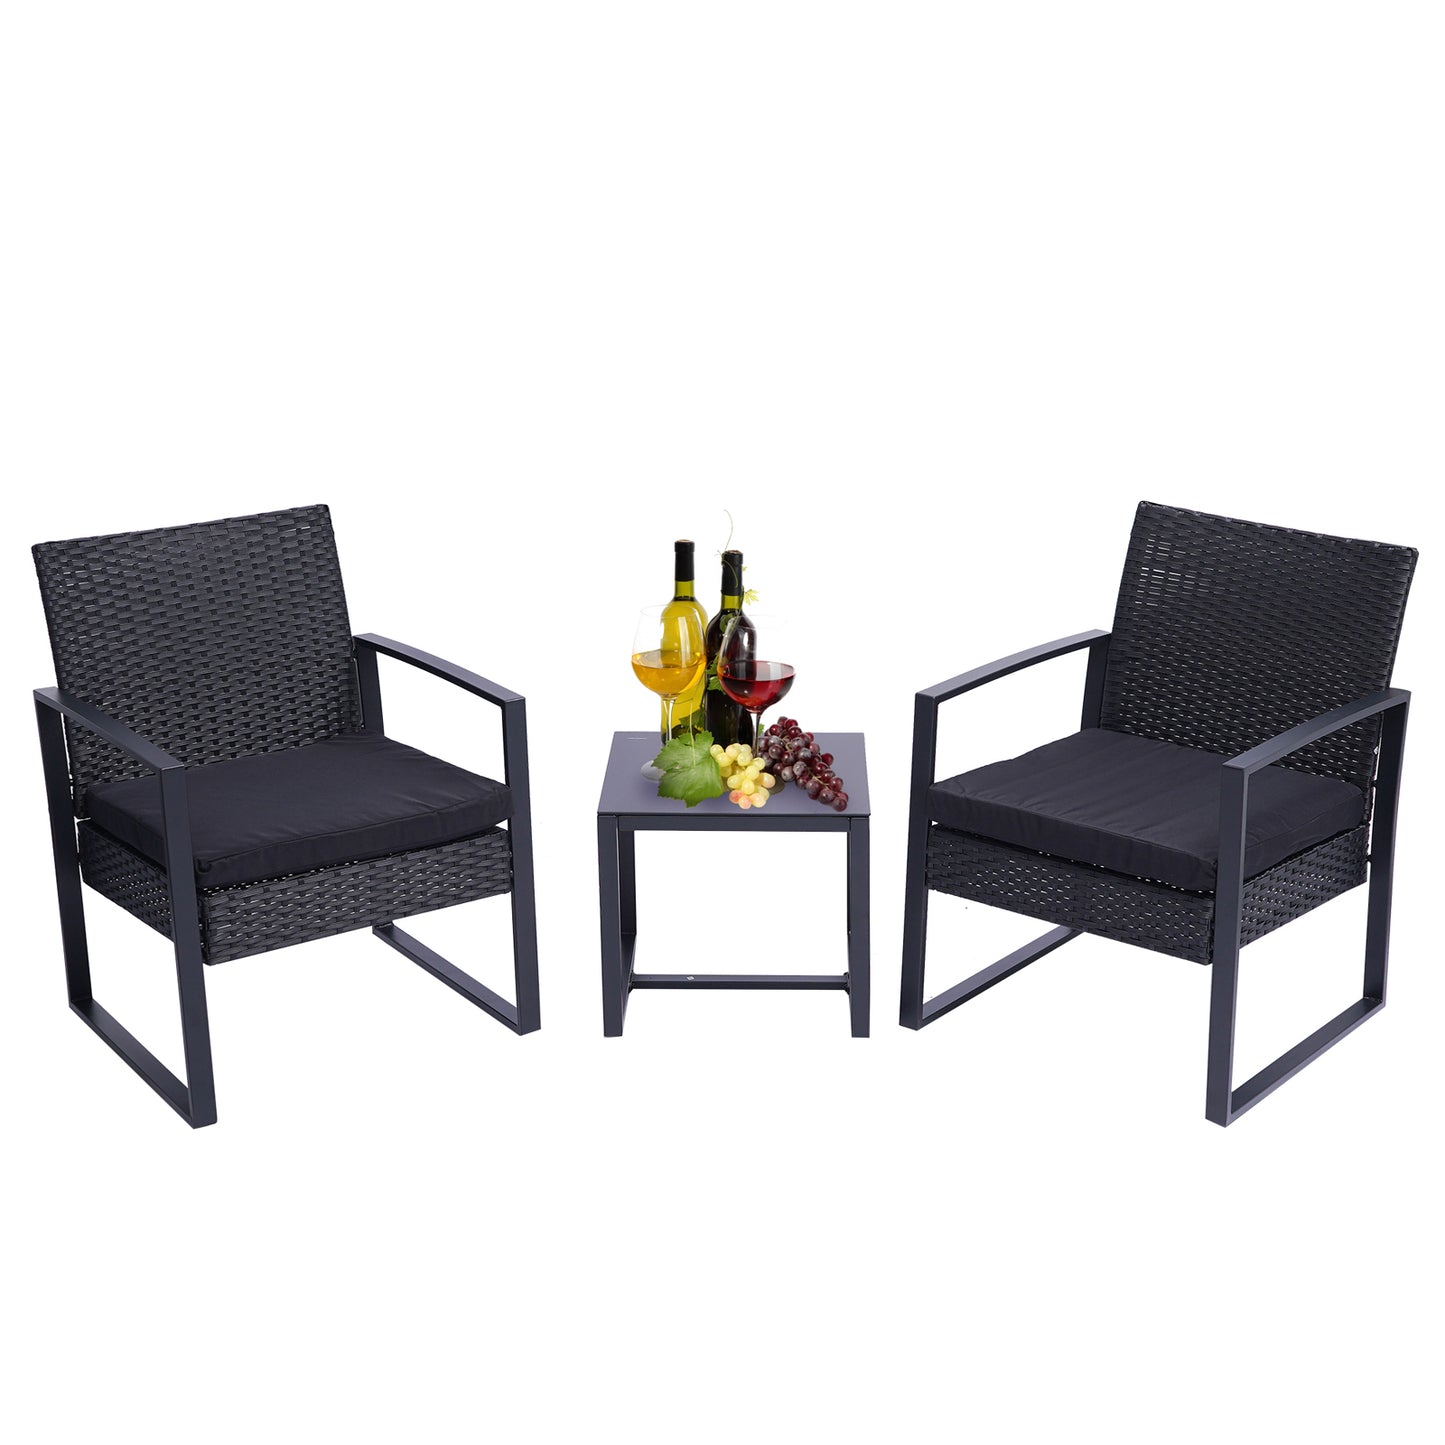 3 Piece Patio Sets Clearance, Outdoor Bistro Table Set, Patio Cushioned Chairs with Table, All-Weather Wicker Conversation Set, Patio Furniture Set Include 2 Chairs with Cushions and 1 Tea Table, B159